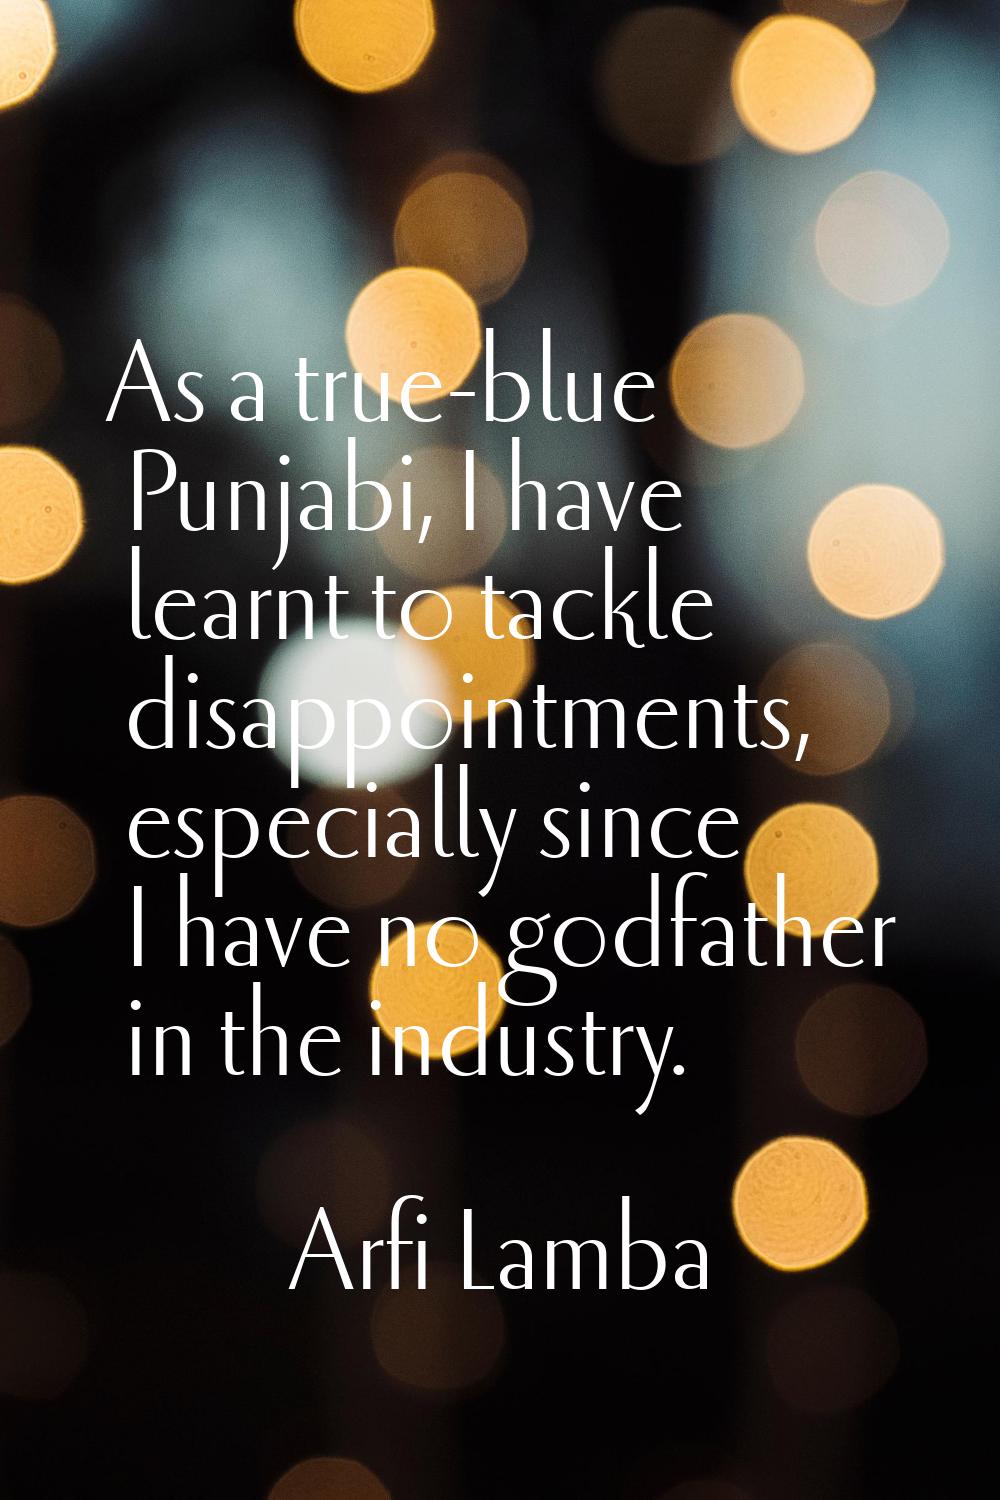 As a true-blue Punjabi, I have learnt to tackle disappointments, especially since I have no godfath